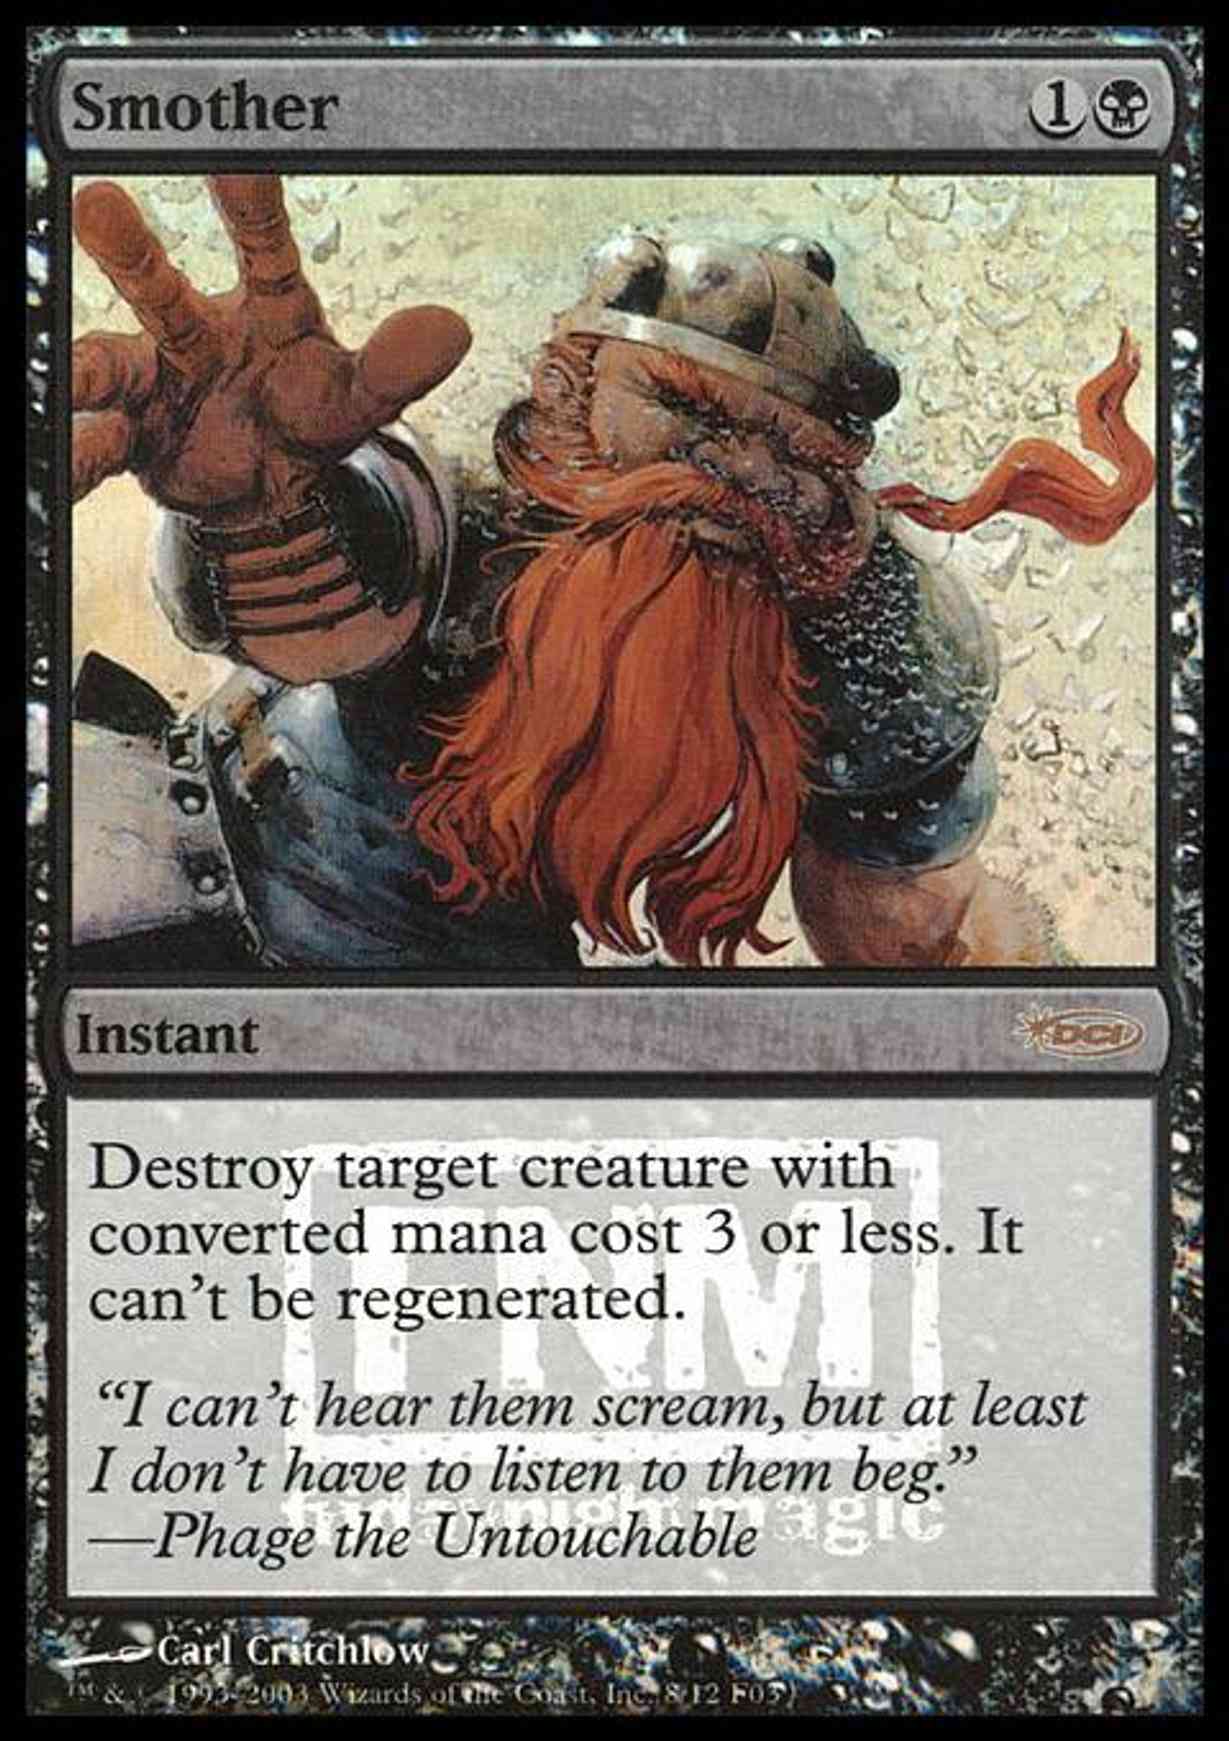 Smother magic card front